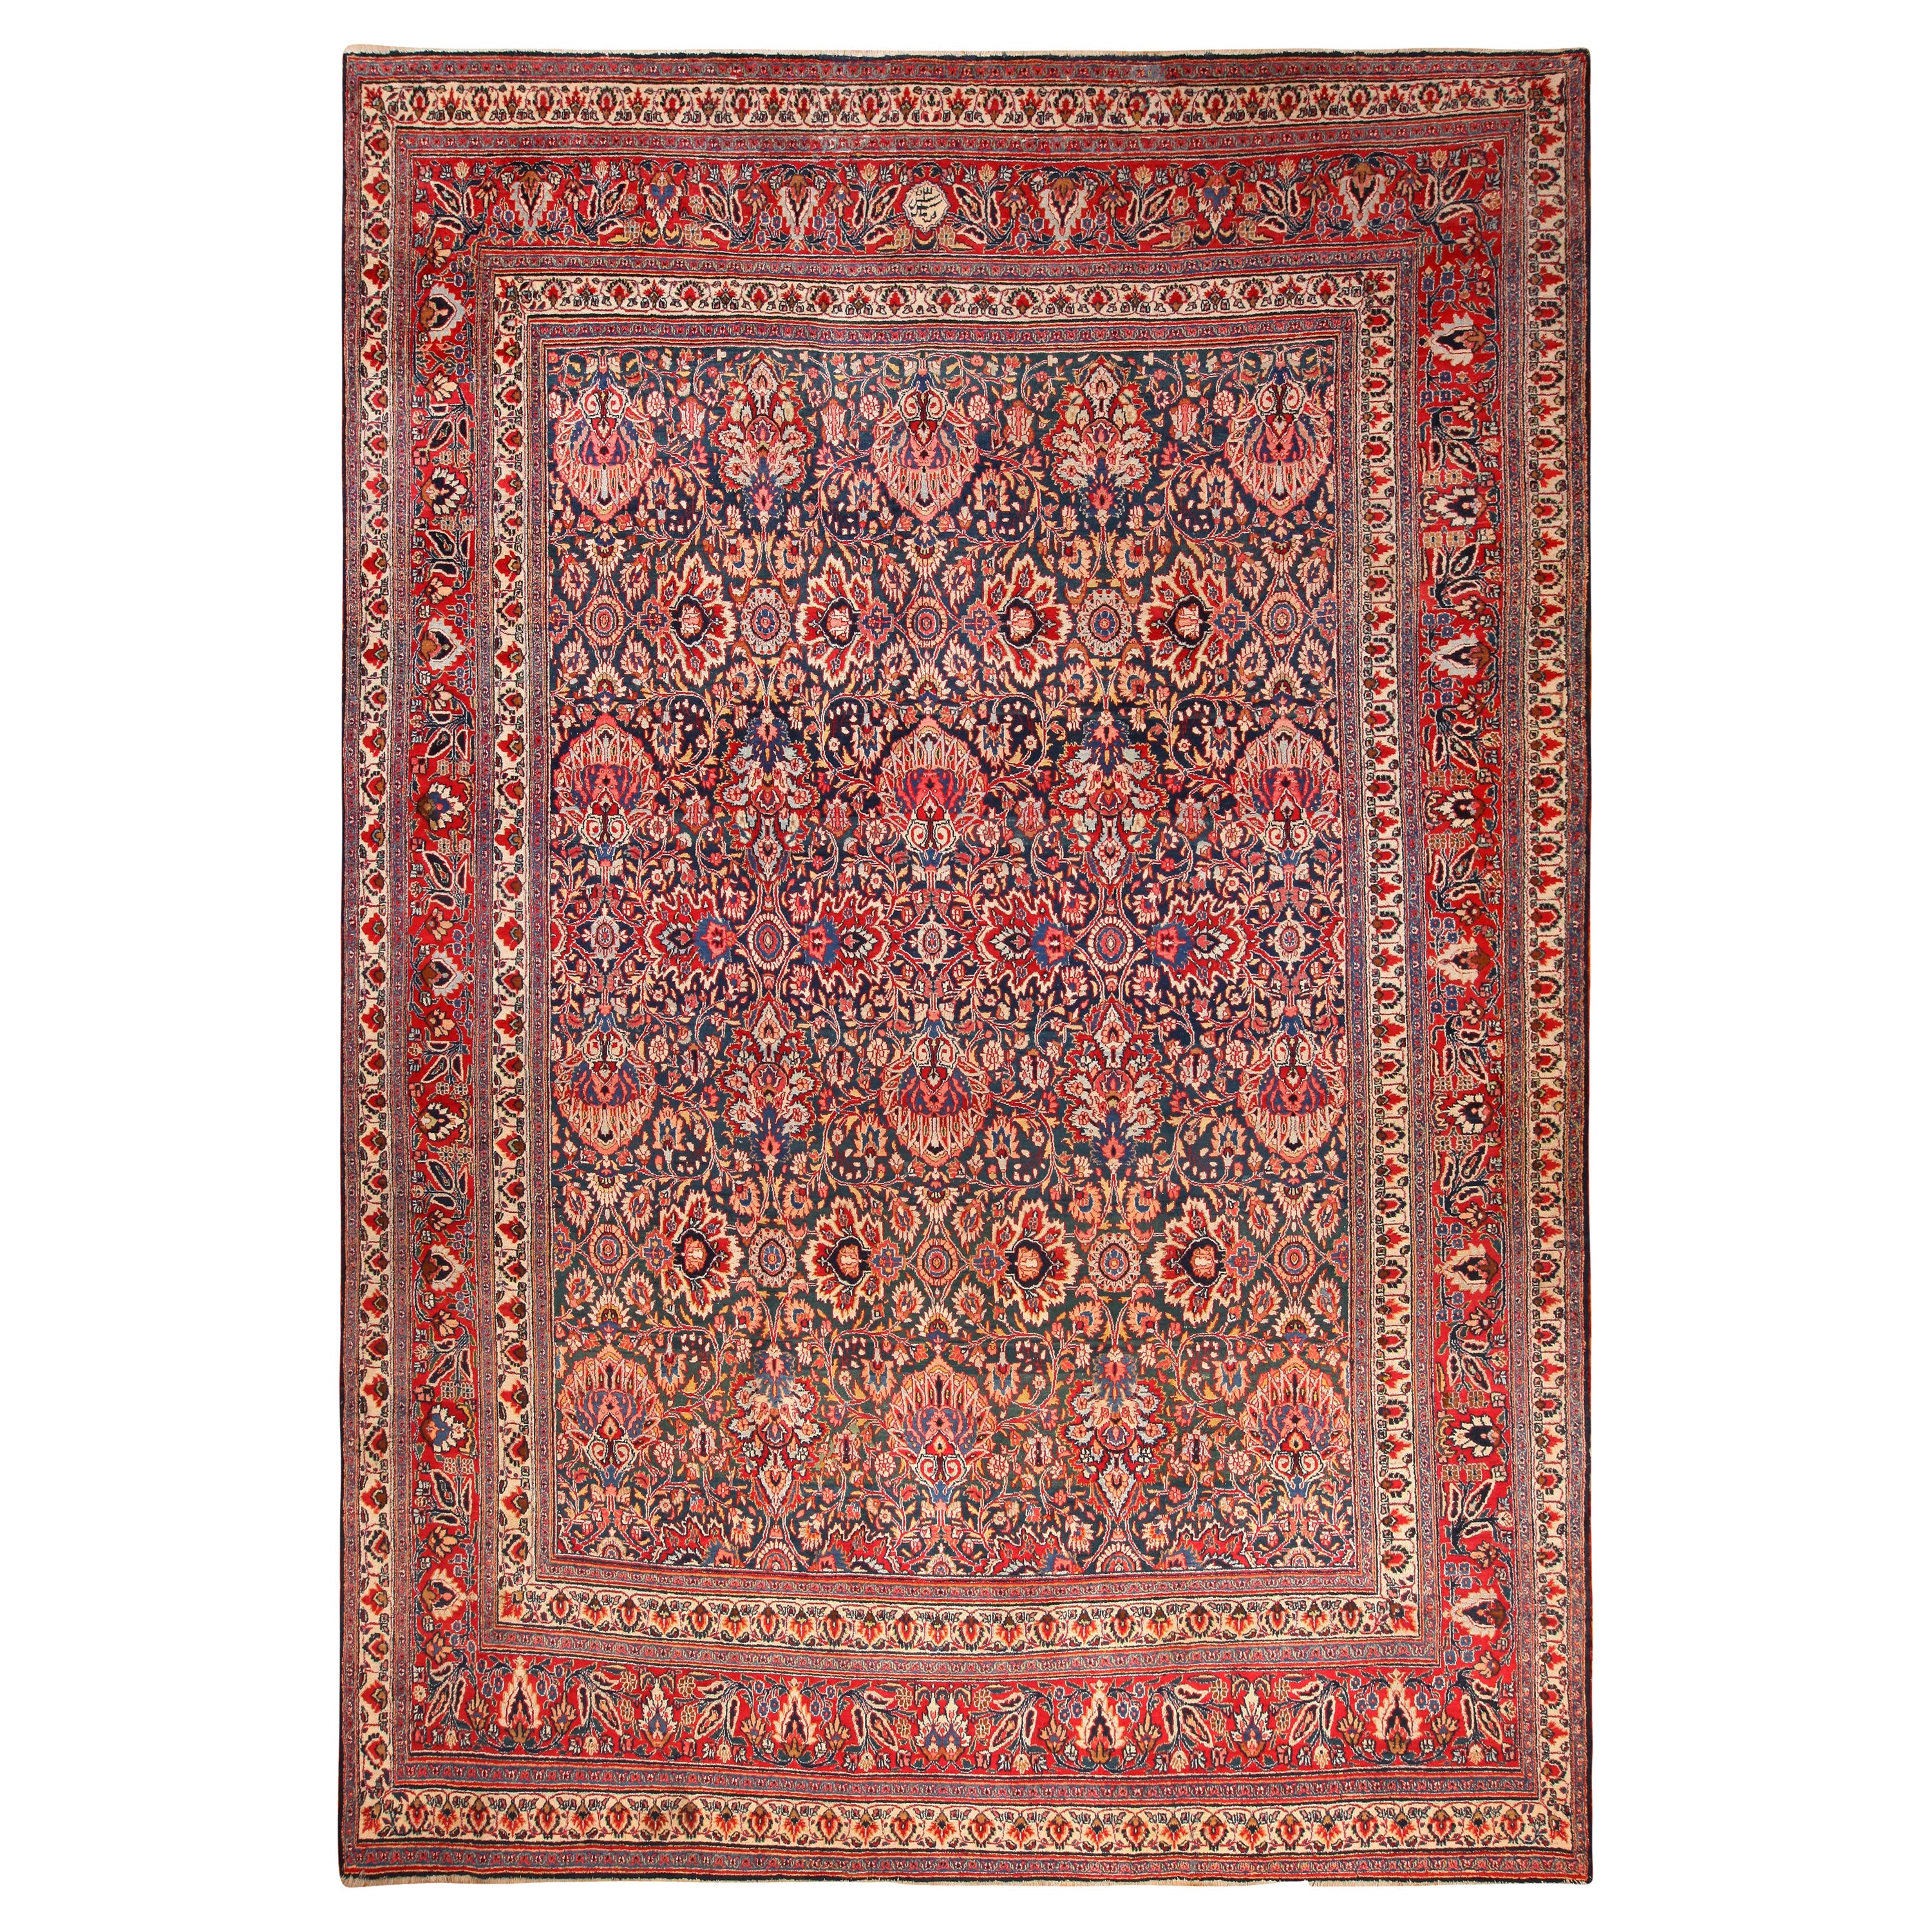 Nazmiyal Collection Large Antique Persian Khorassan Rug. 11 ft 10 in x 17 ft